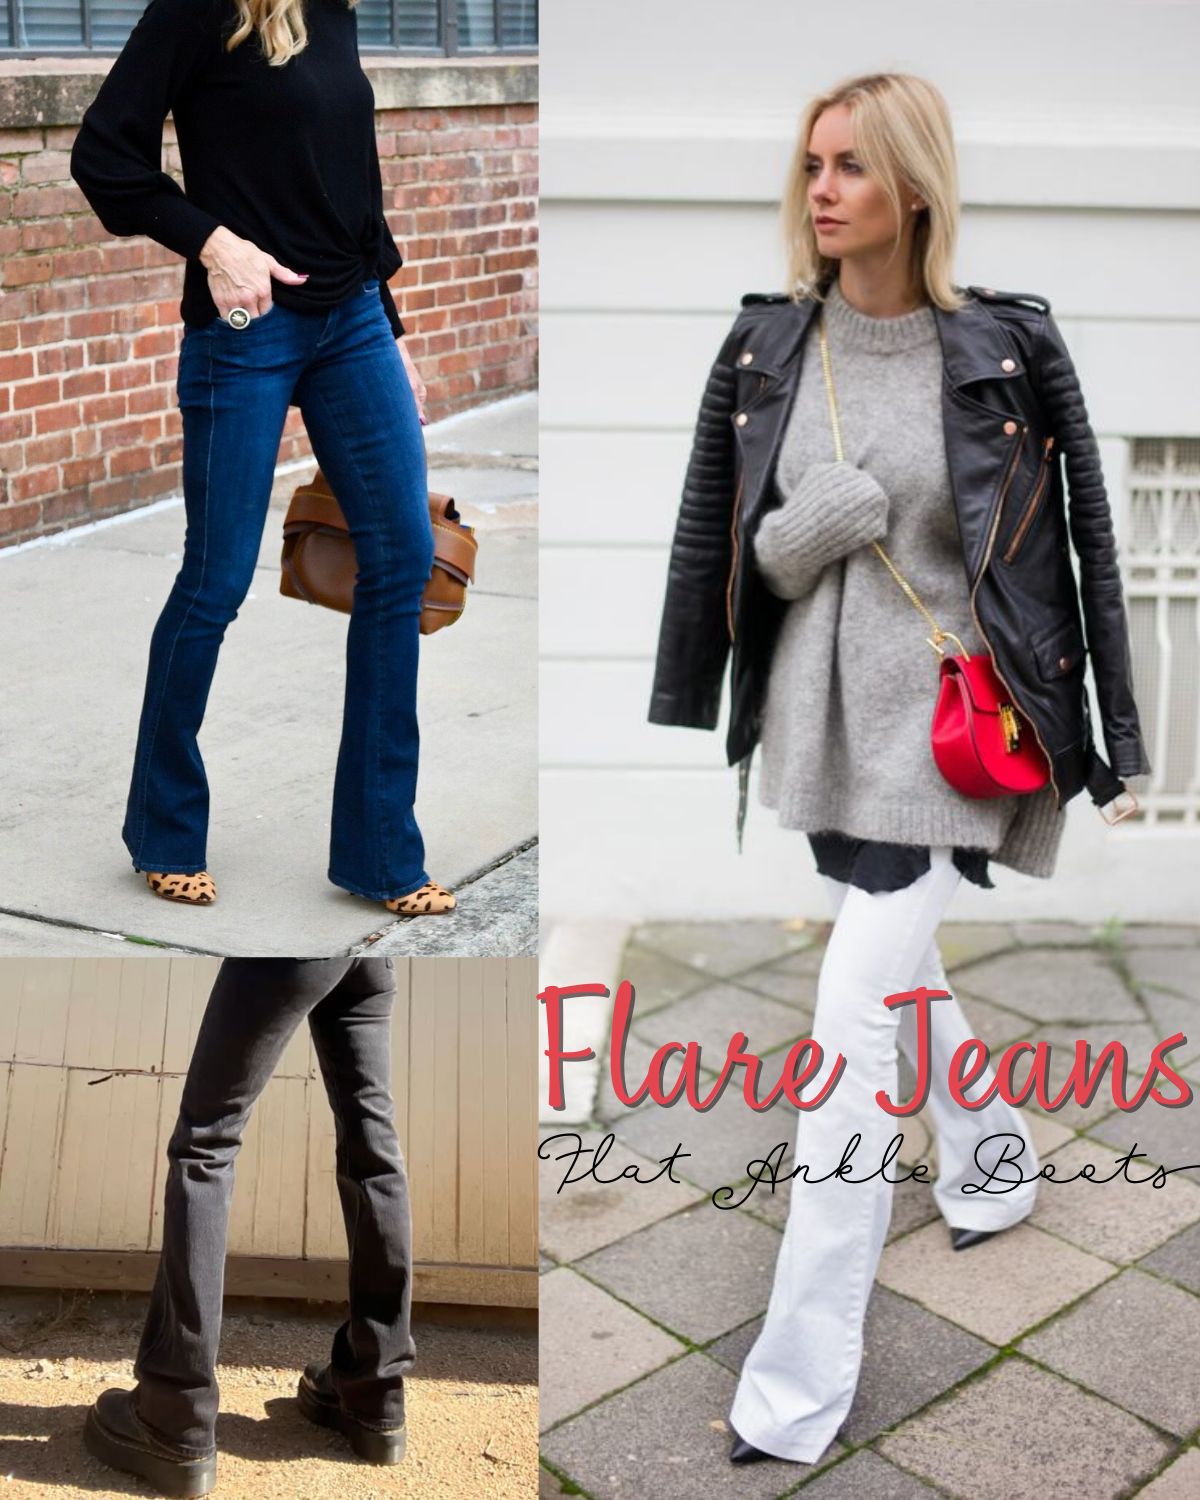 Three outfits with flare jeans and boots